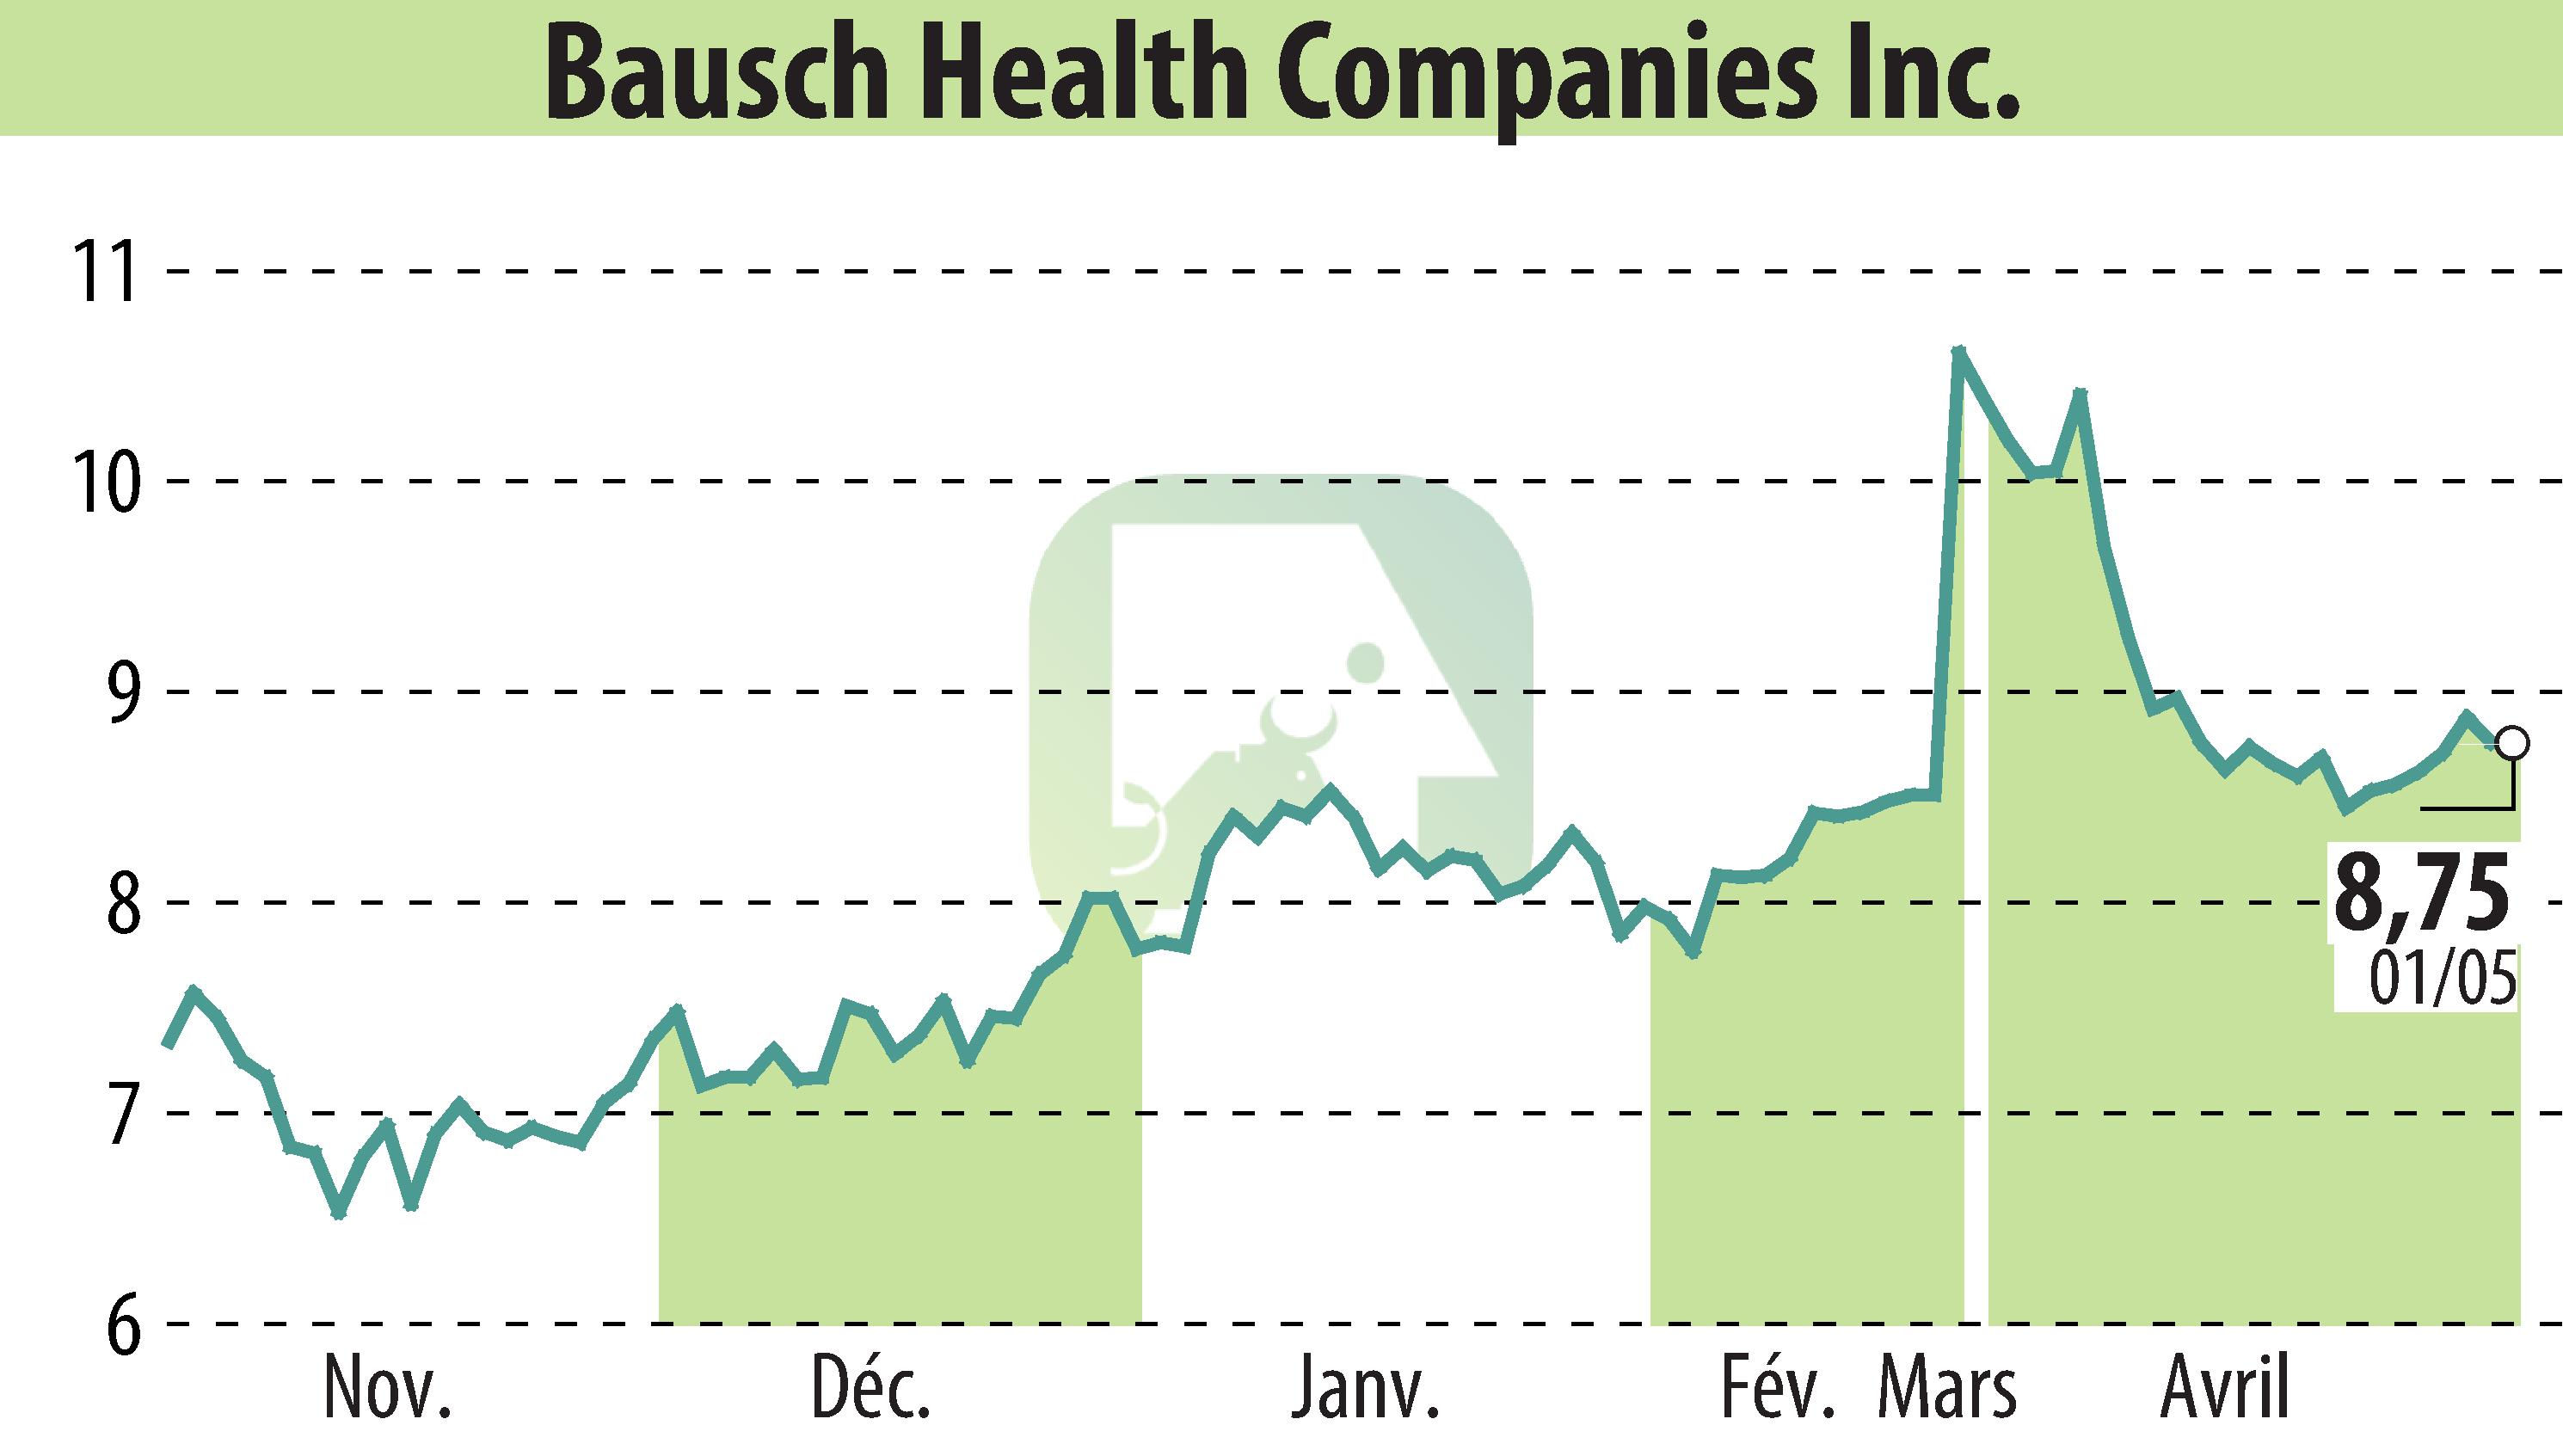 Stock price chart of Bausch Health Companies Inc. (EBR:BHC) showing fluctuations.